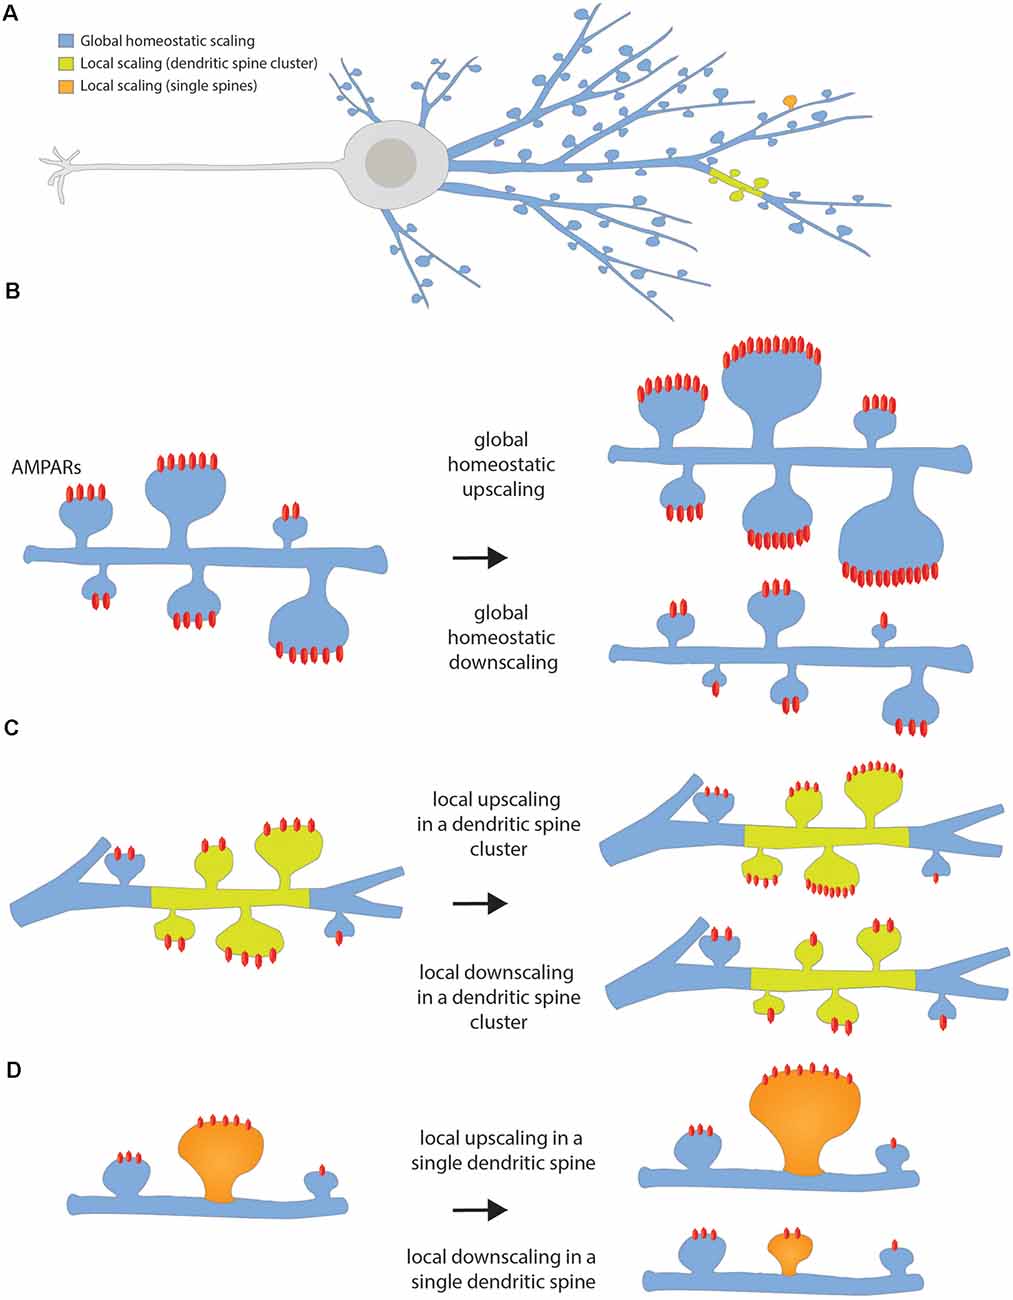 Molecular mechanisms of consolidation. After the encoding of a